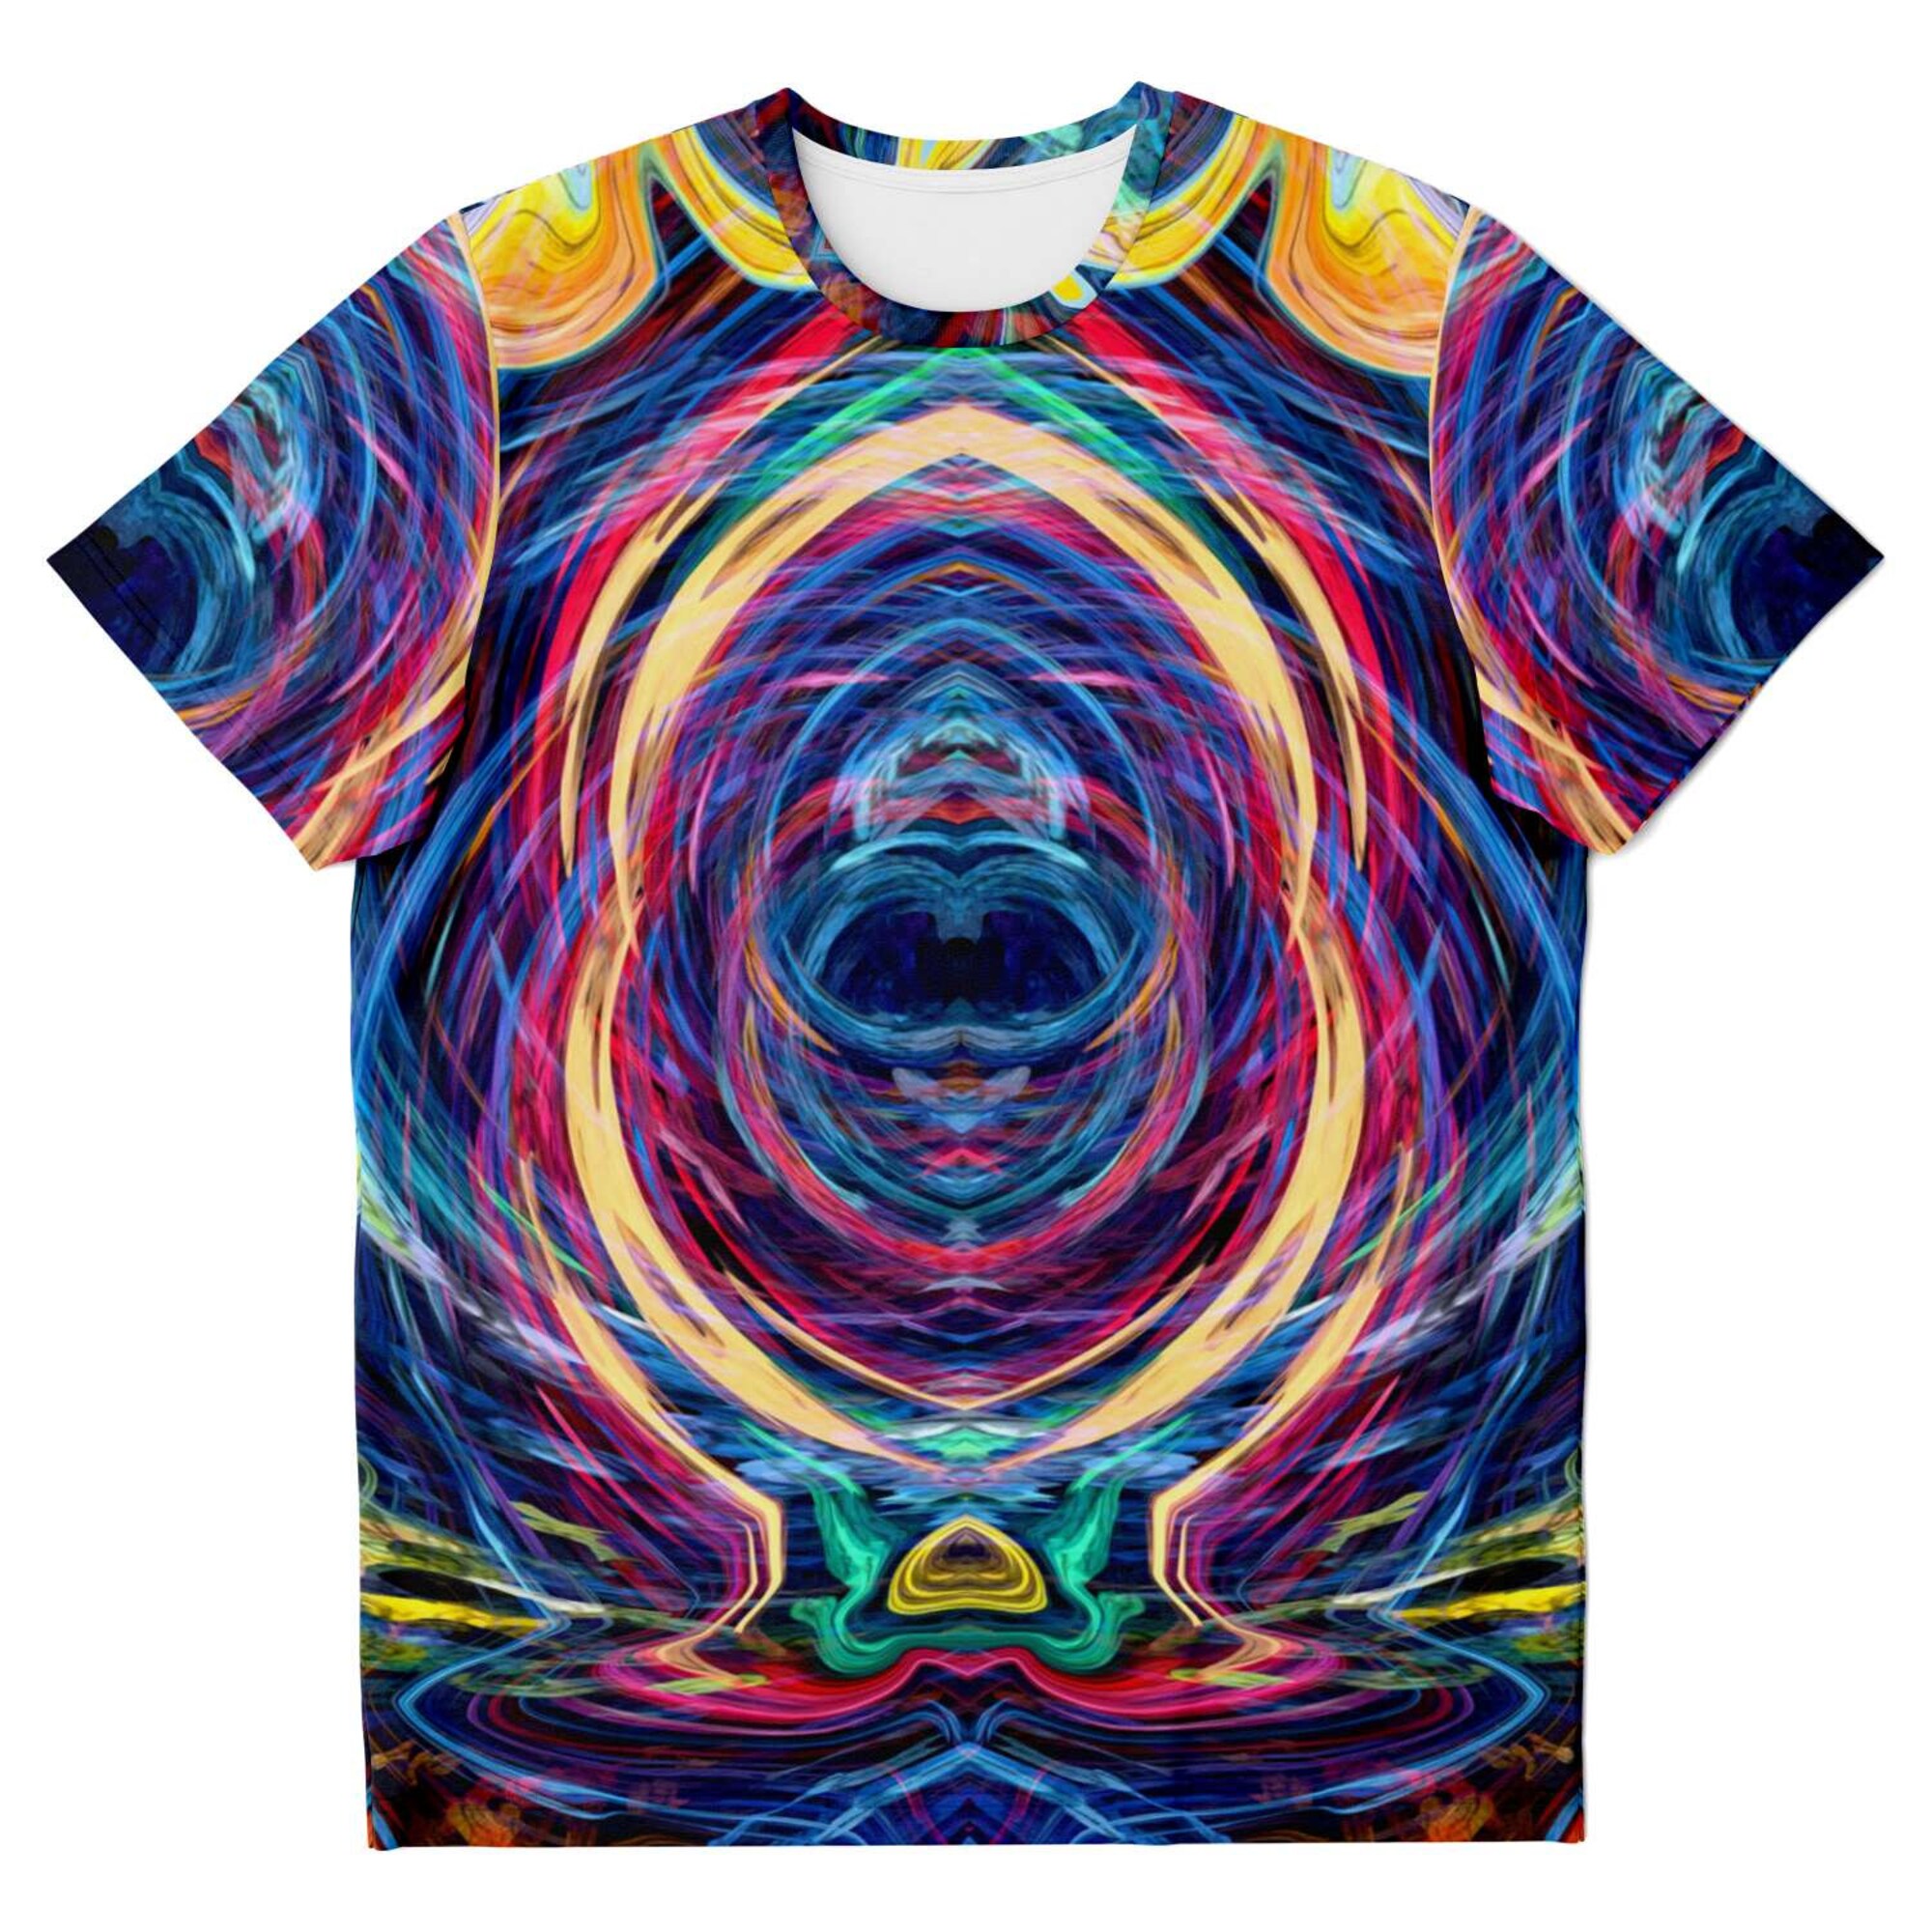 Discover Transcendence Trippy 3D T Shirt